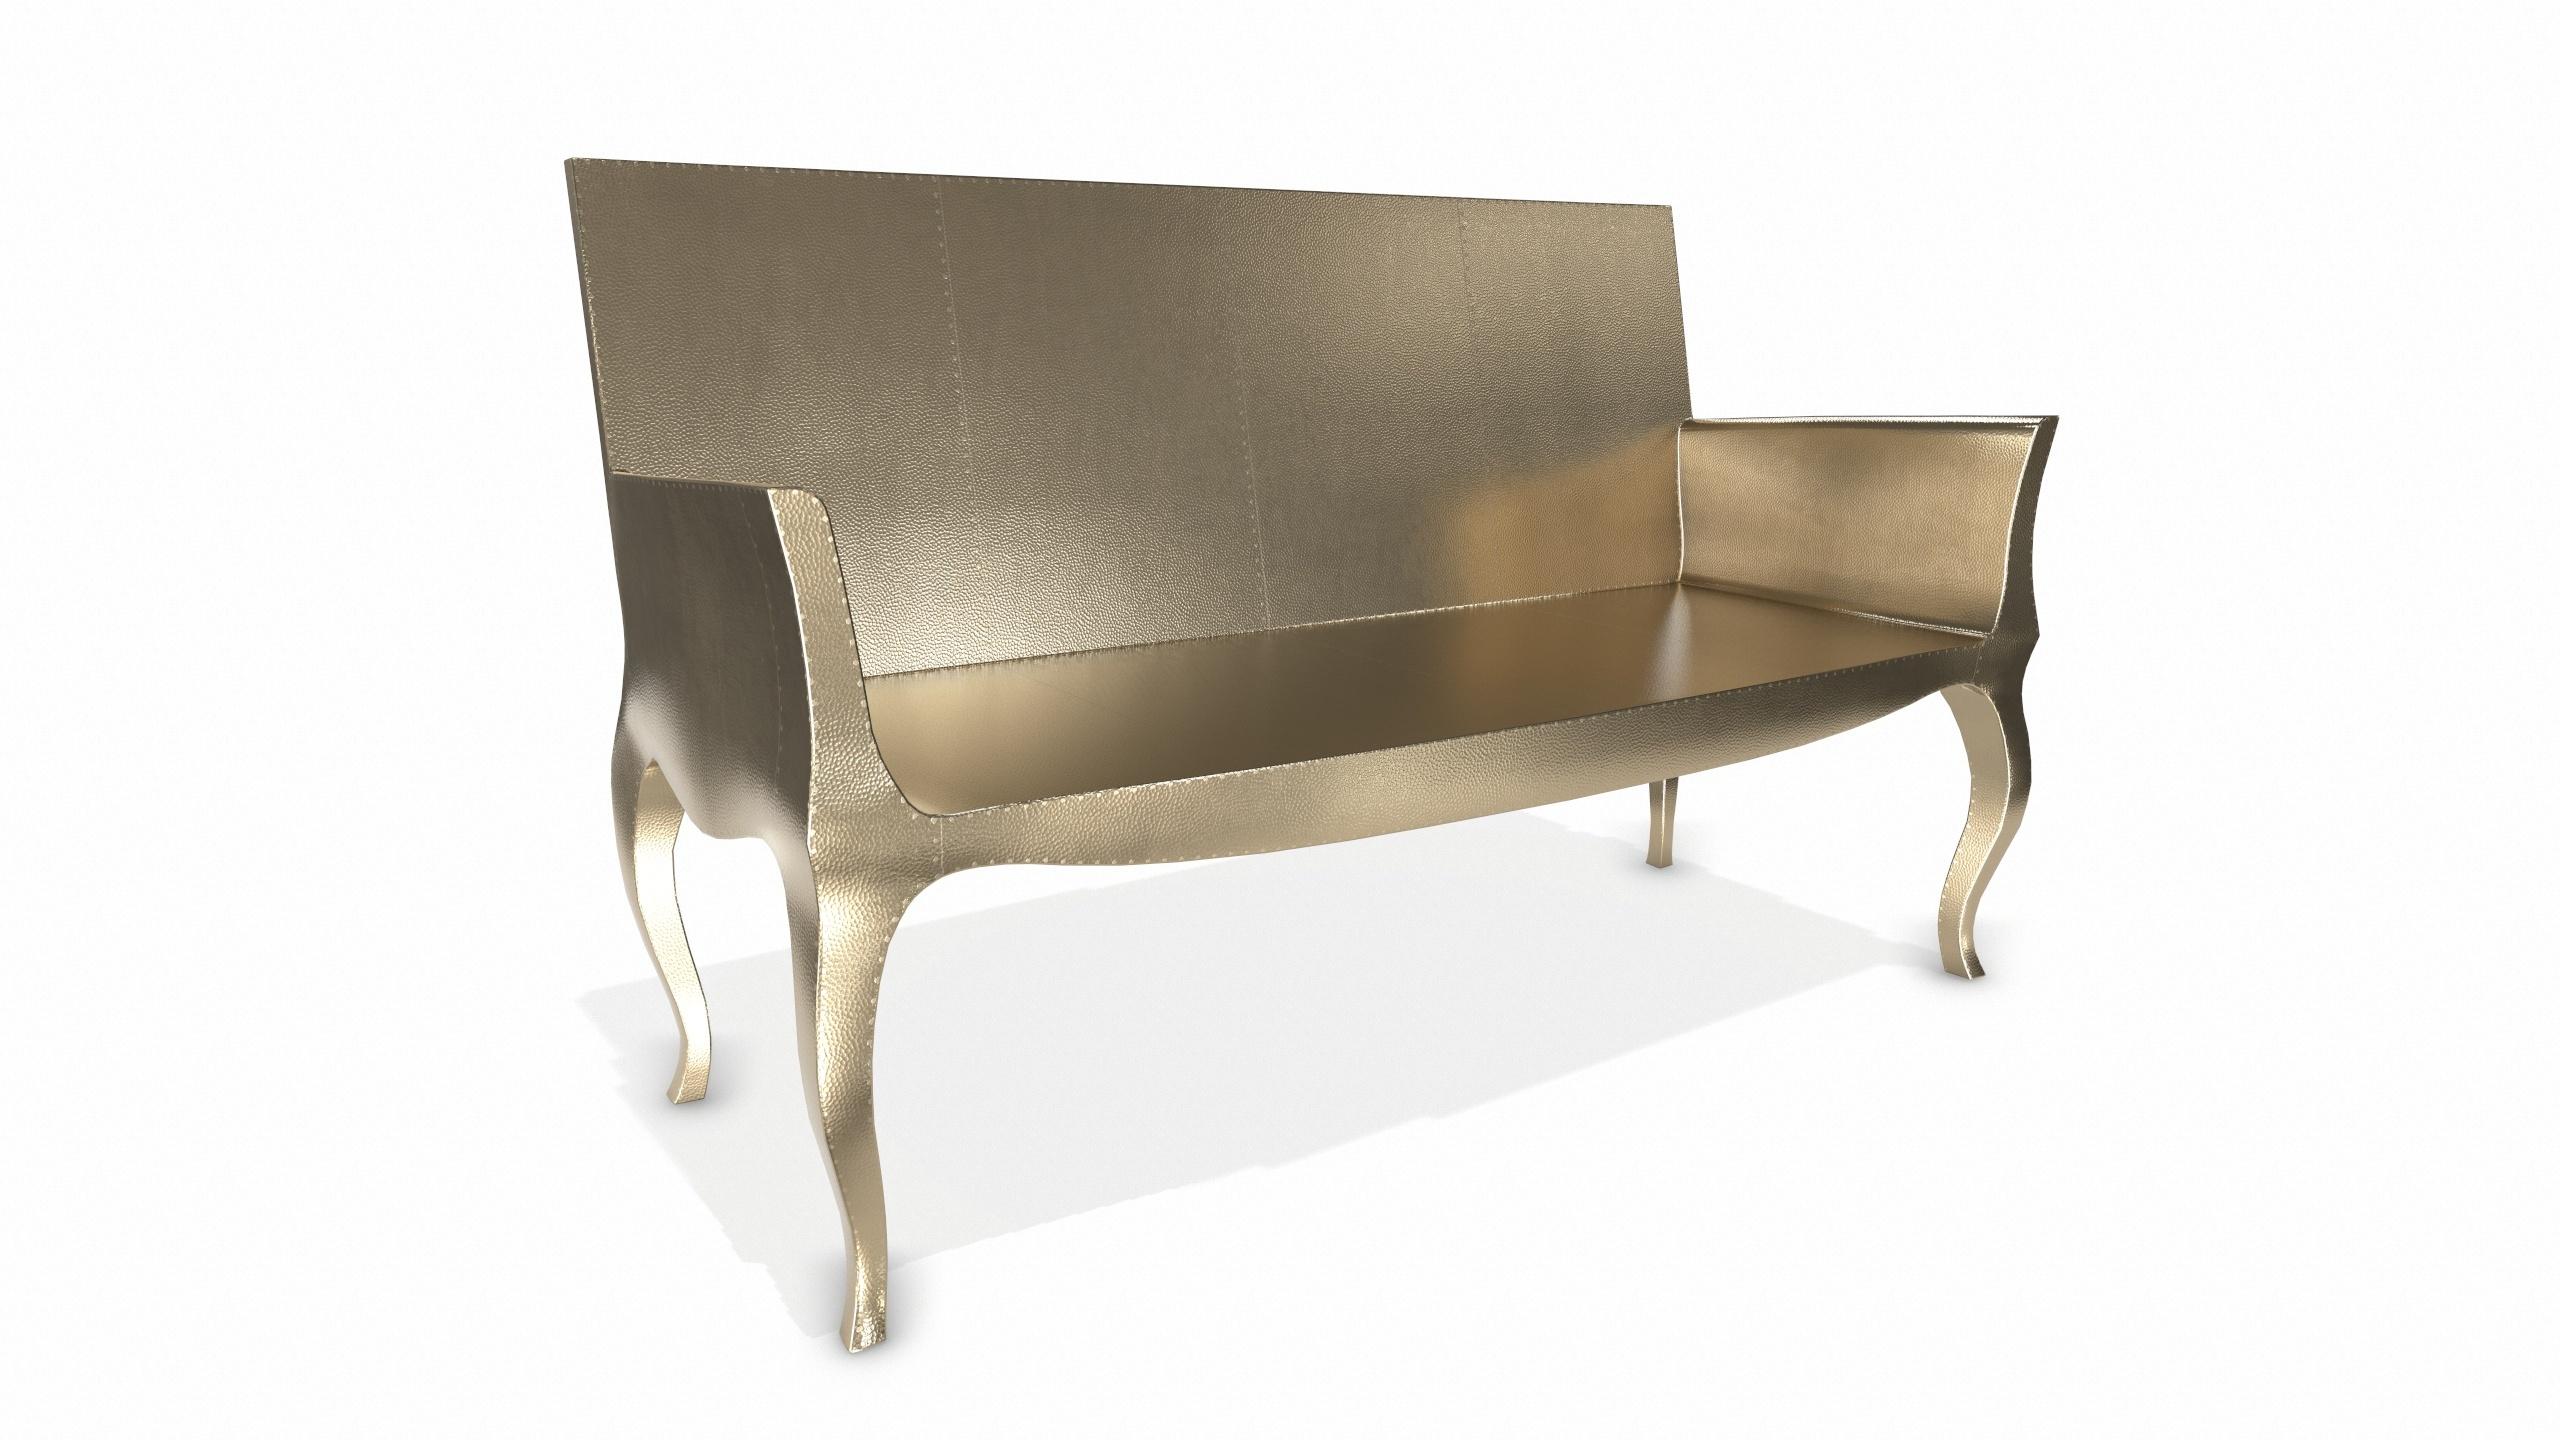 Contemporary Louise Settee Art Deco Loveseats in Mid. Hammered Brass by Paul Mathieu For Sale